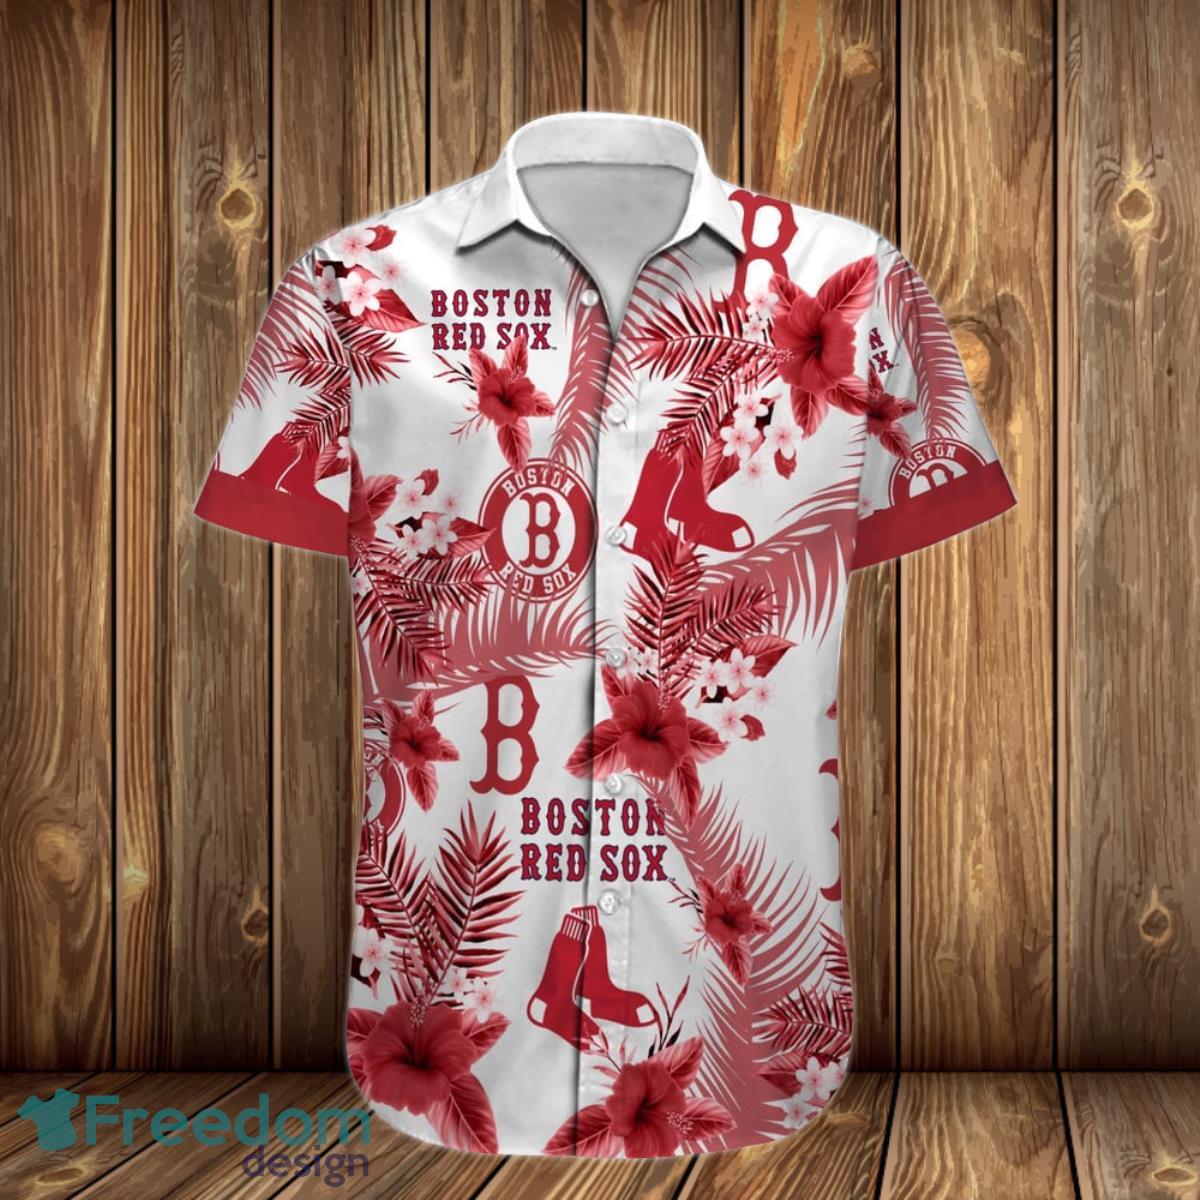 Boston Red Sox MLB Hawaiian Shirt Special Gift For Real Fans - Freedomdesign